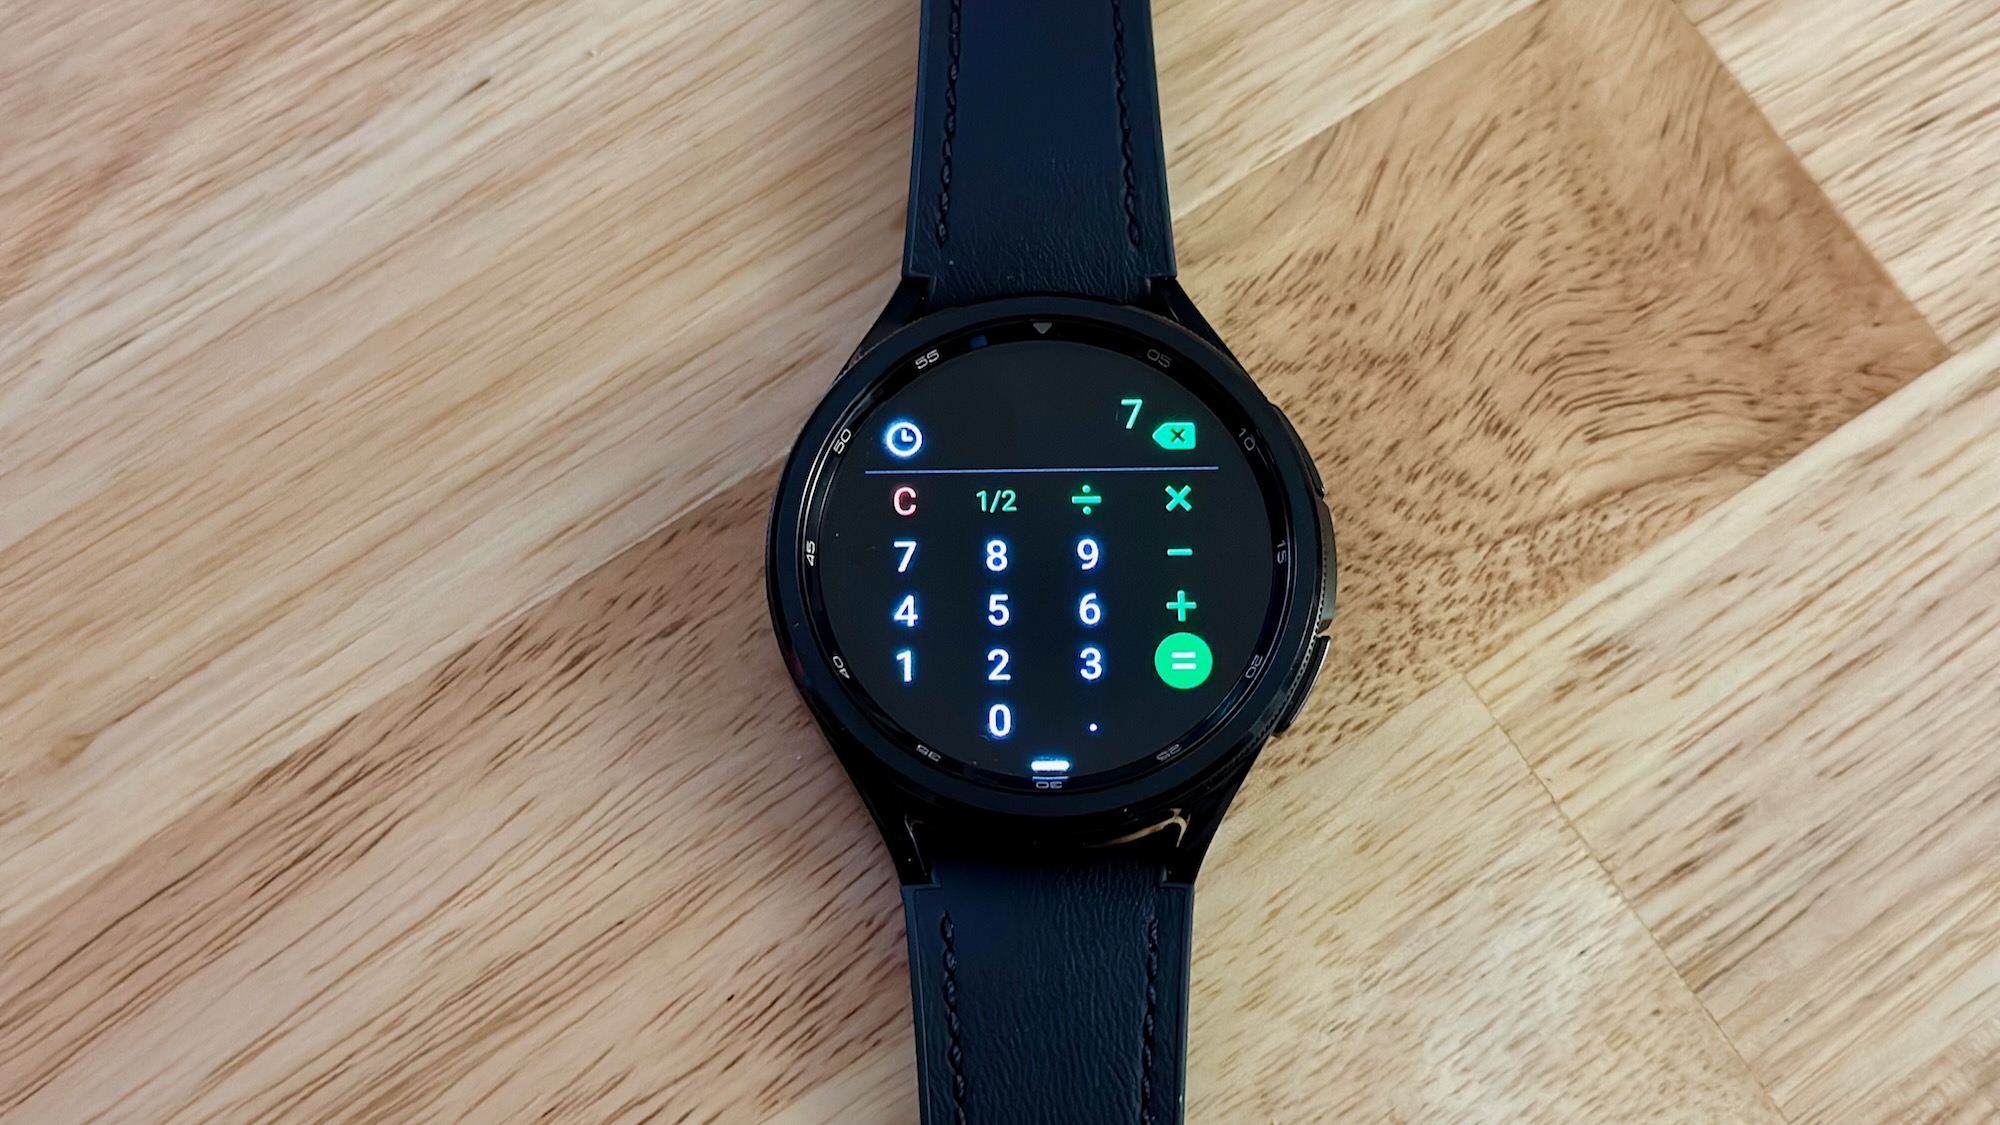 Here's how much the Galaxy Watch 4 costs and when you can buy it